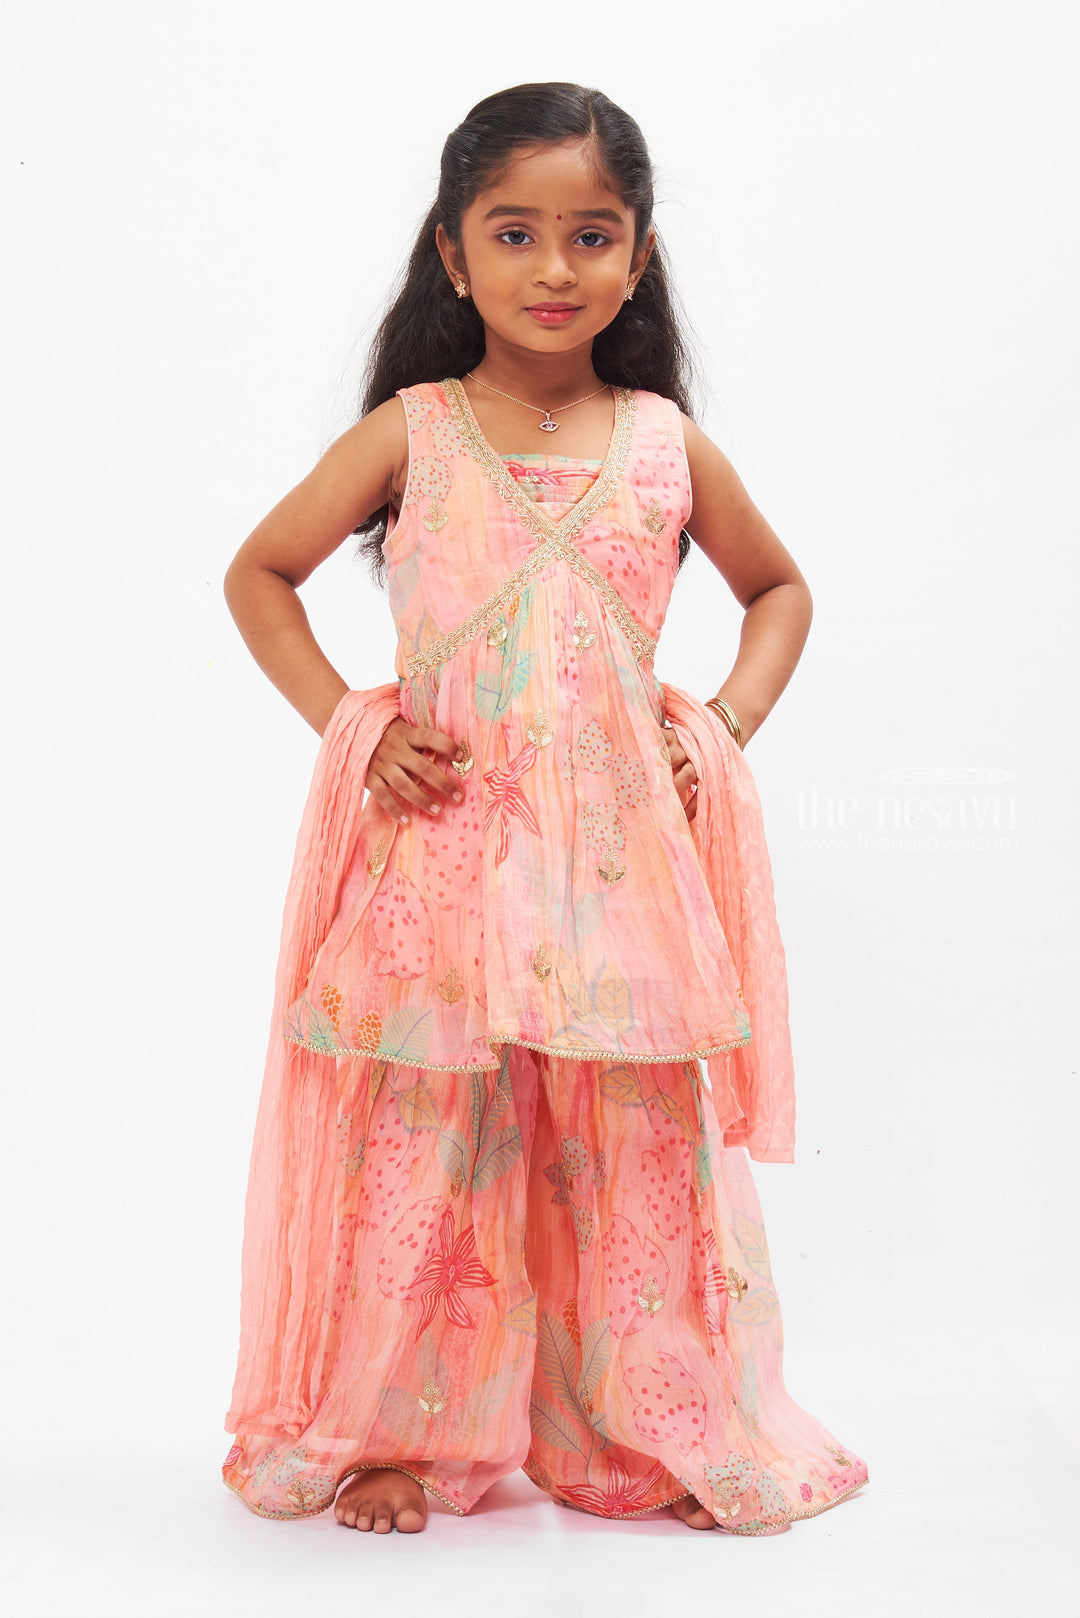 The Nesavu Girls Sharara / Plazo Set Sparkling Pink Gharara Set with Sequined Accents for Girls Nesavu 16 (1Y) / Pink GPS255A-16 Buy Girls Pink Sequined Gharara Set | Floral Printed Ethnic Wear | The Nesavu